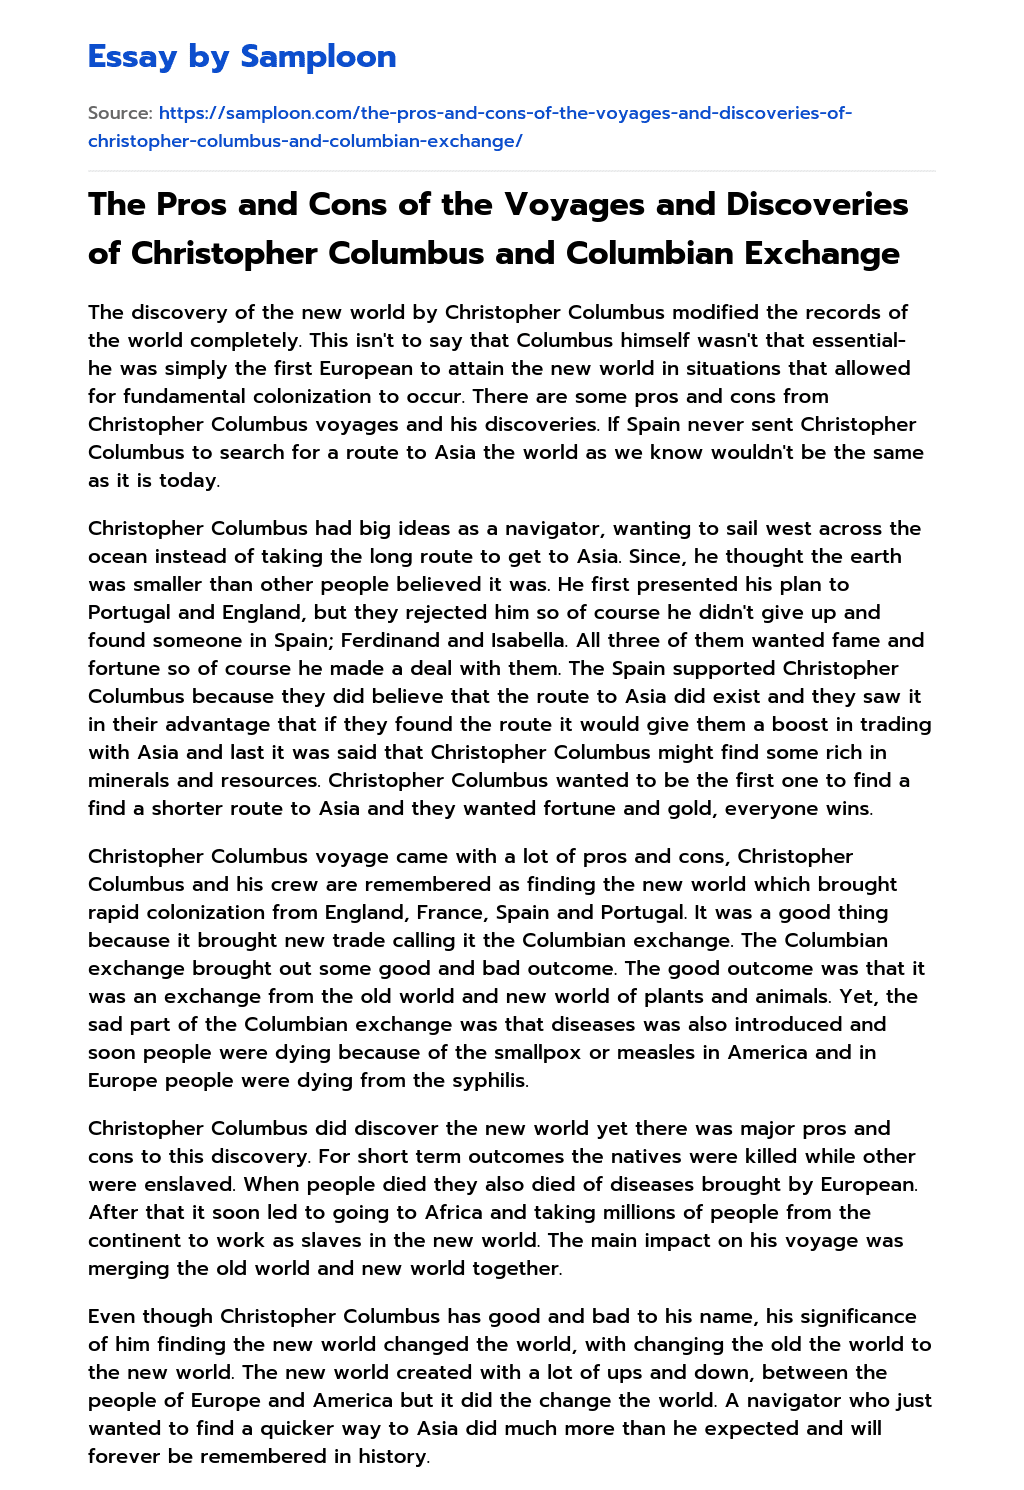 The Pros and Cons of the Voyages and Discoveries of Christopher Columbus and Columbian Exchange essay